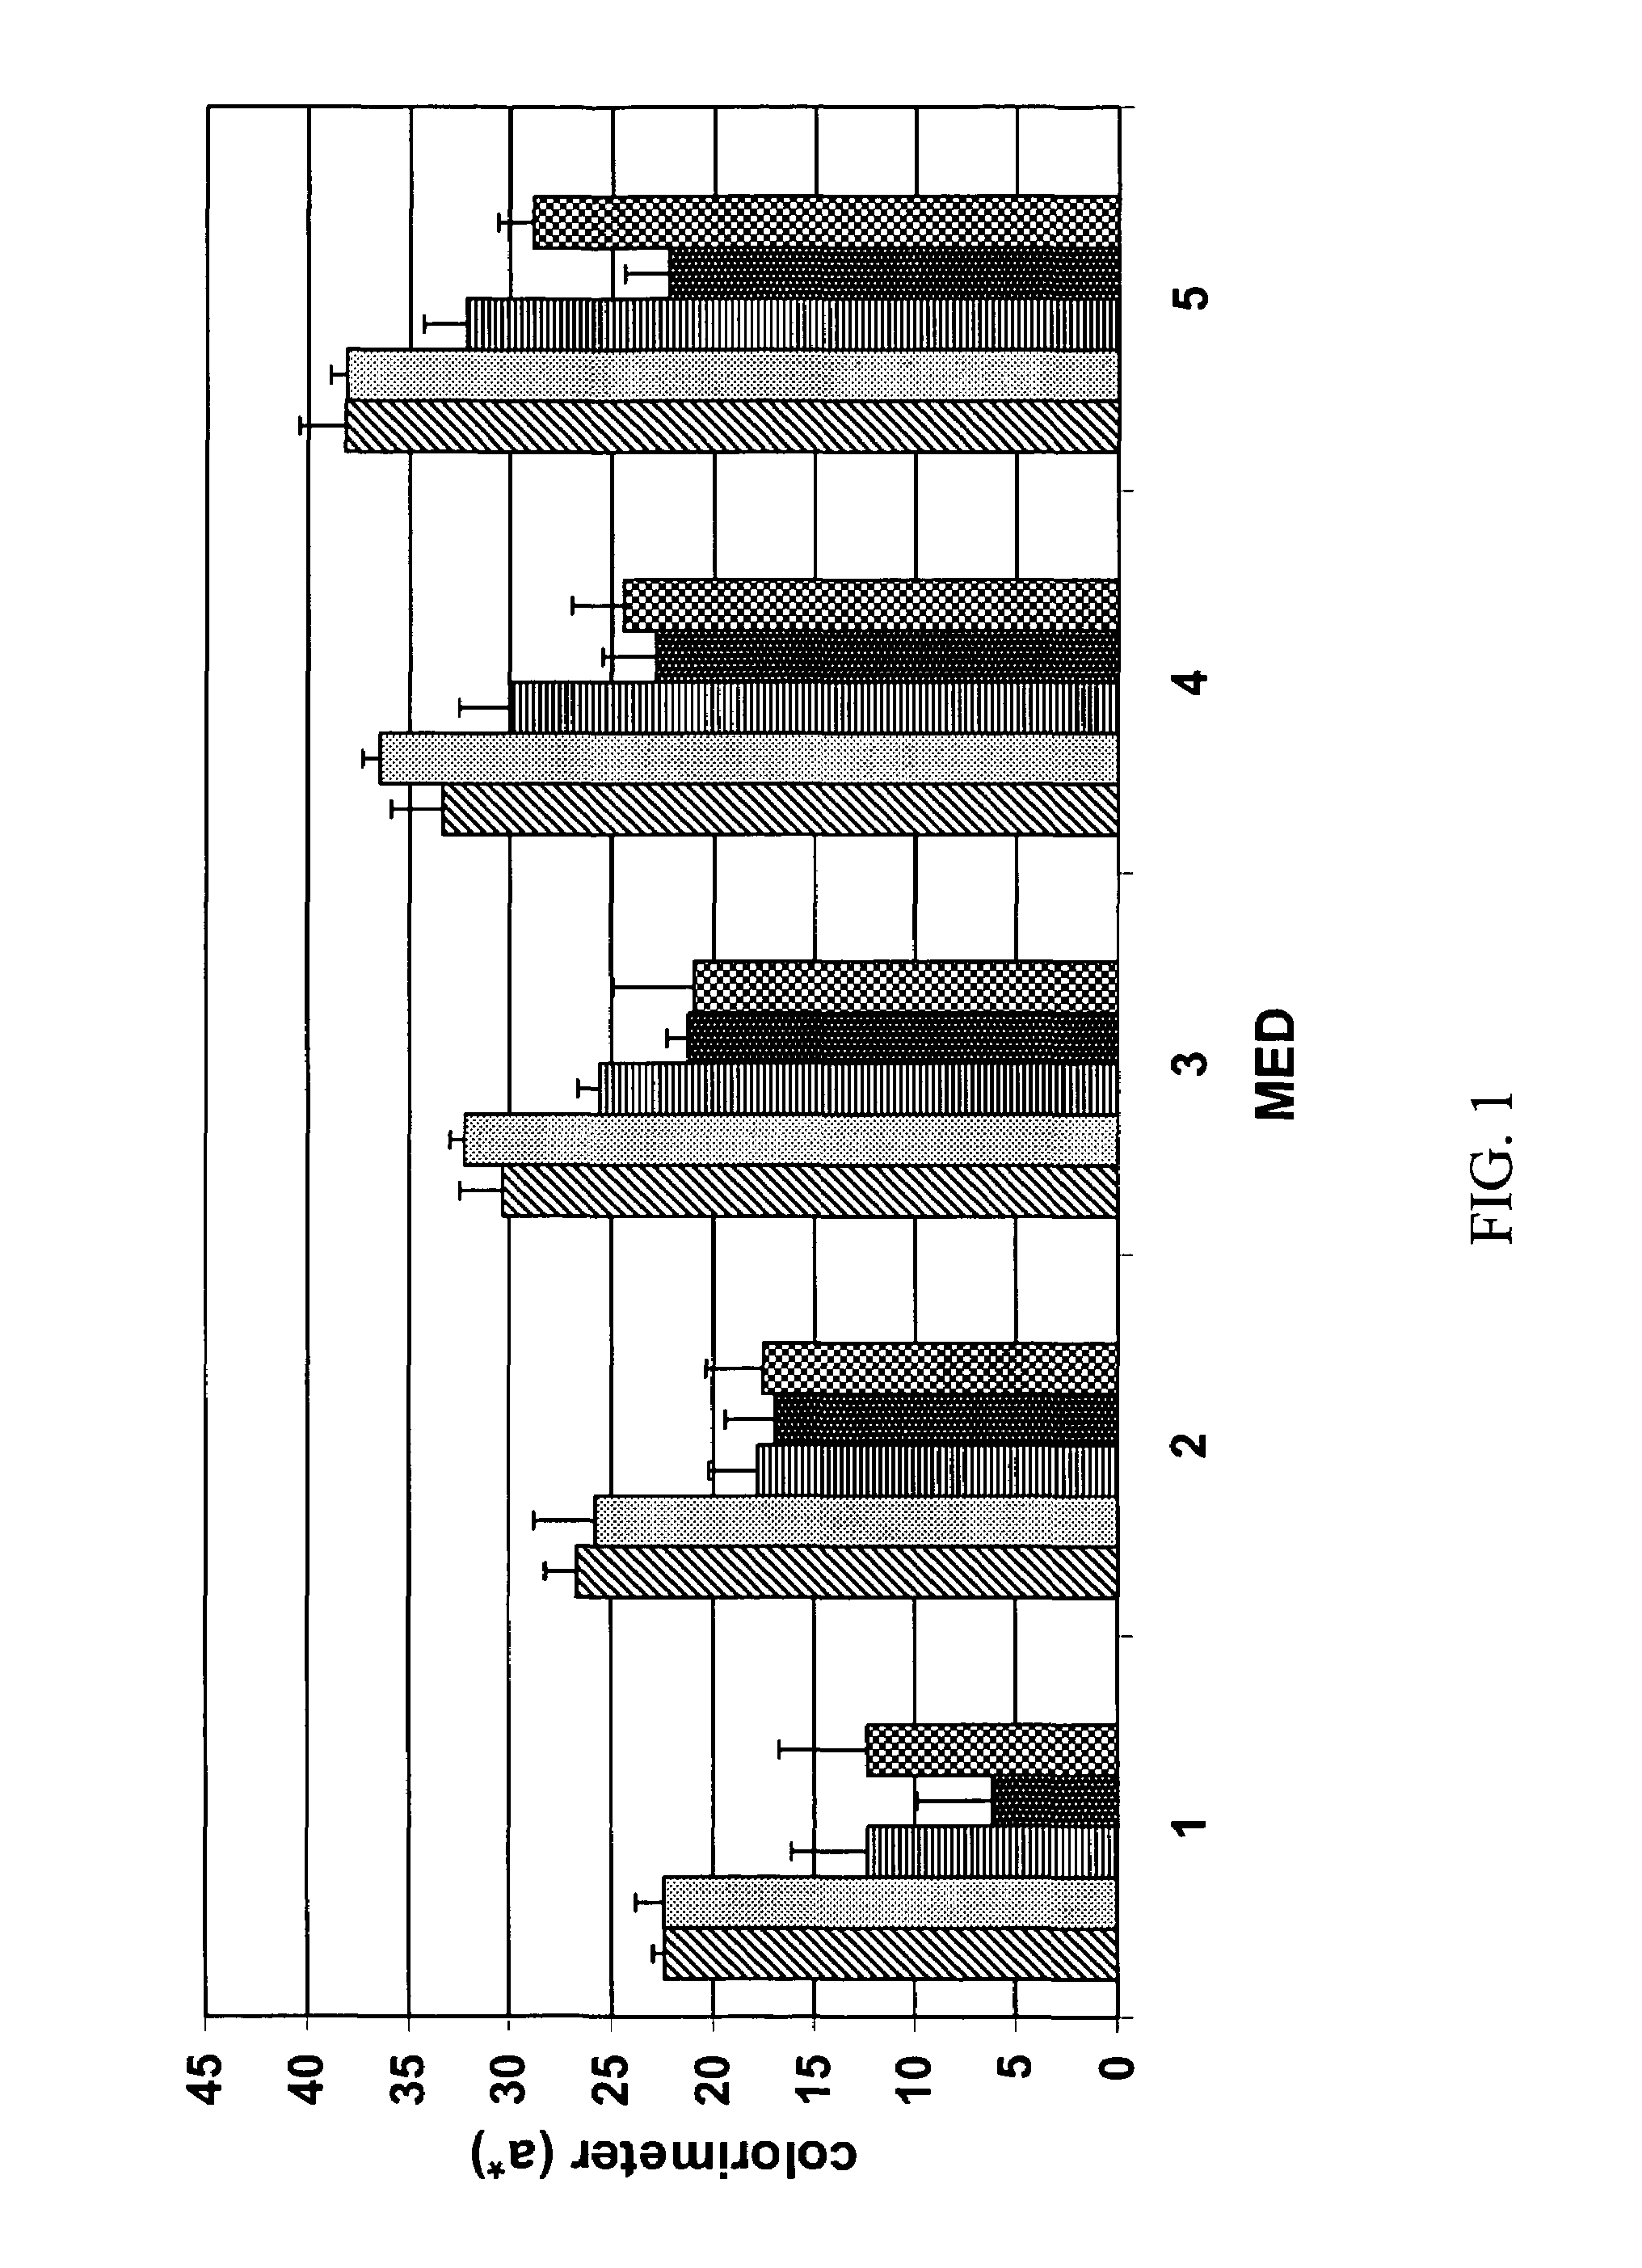 Stabilized ascorbic acid compositions and methods therefor